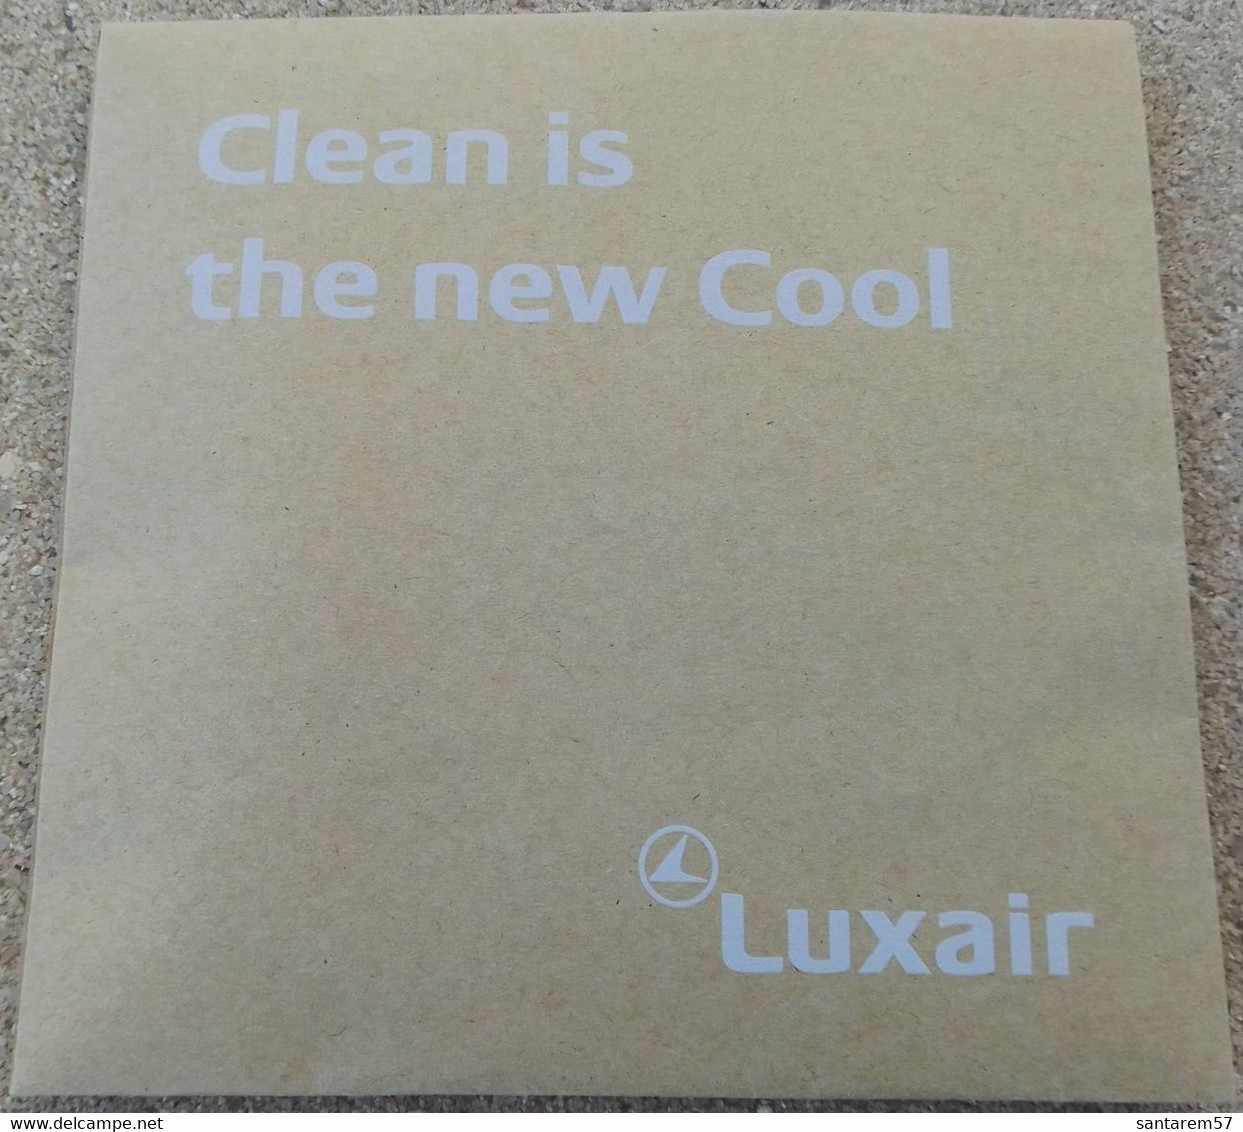 Luxair Pochette Traveller Kit Hygiène Clean Is The New Cool - Publicidad